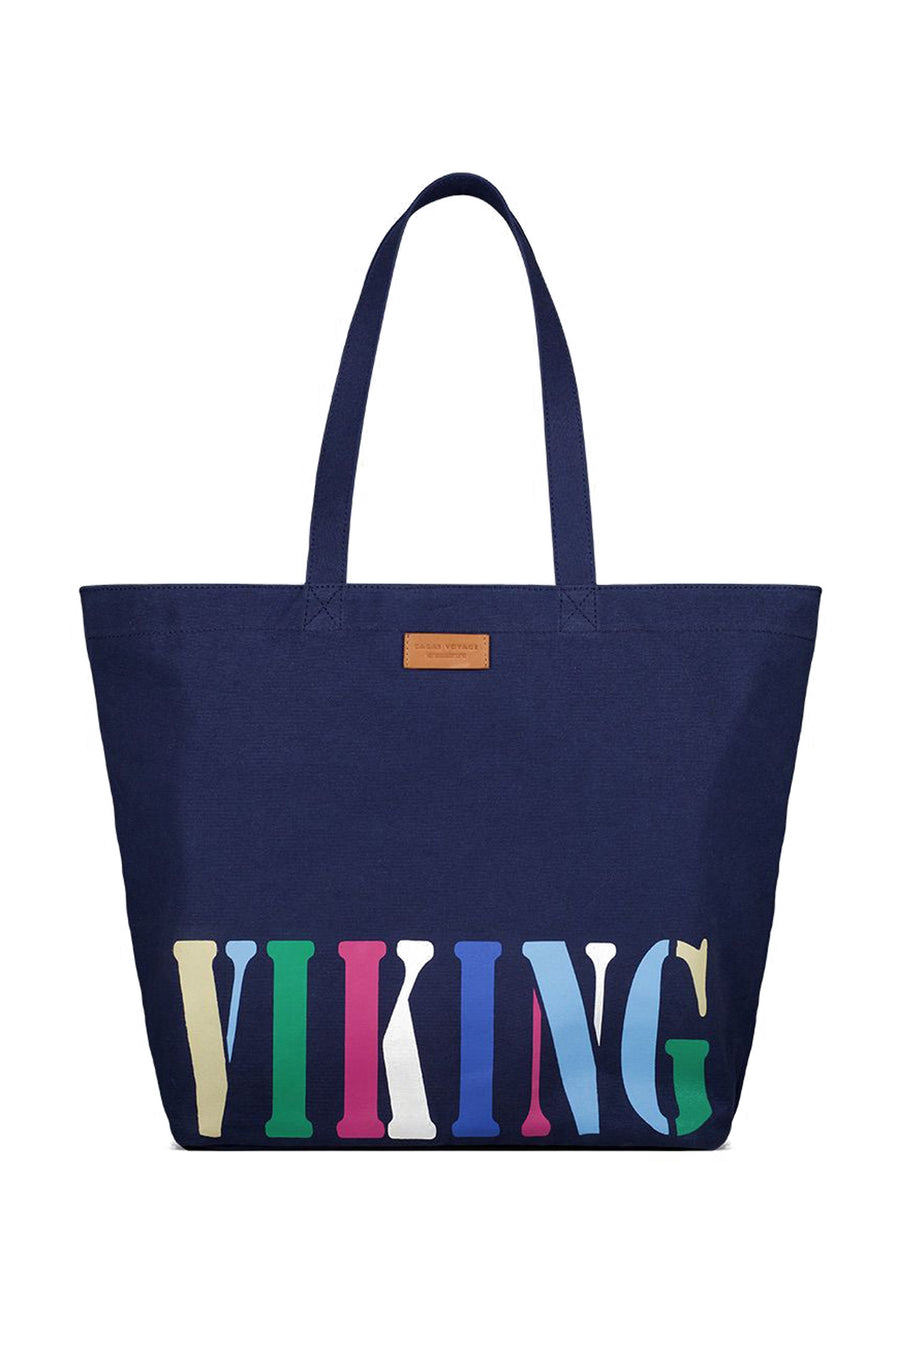 Vanessa Bruno clothing, bags, cabas tote bags and others accessories